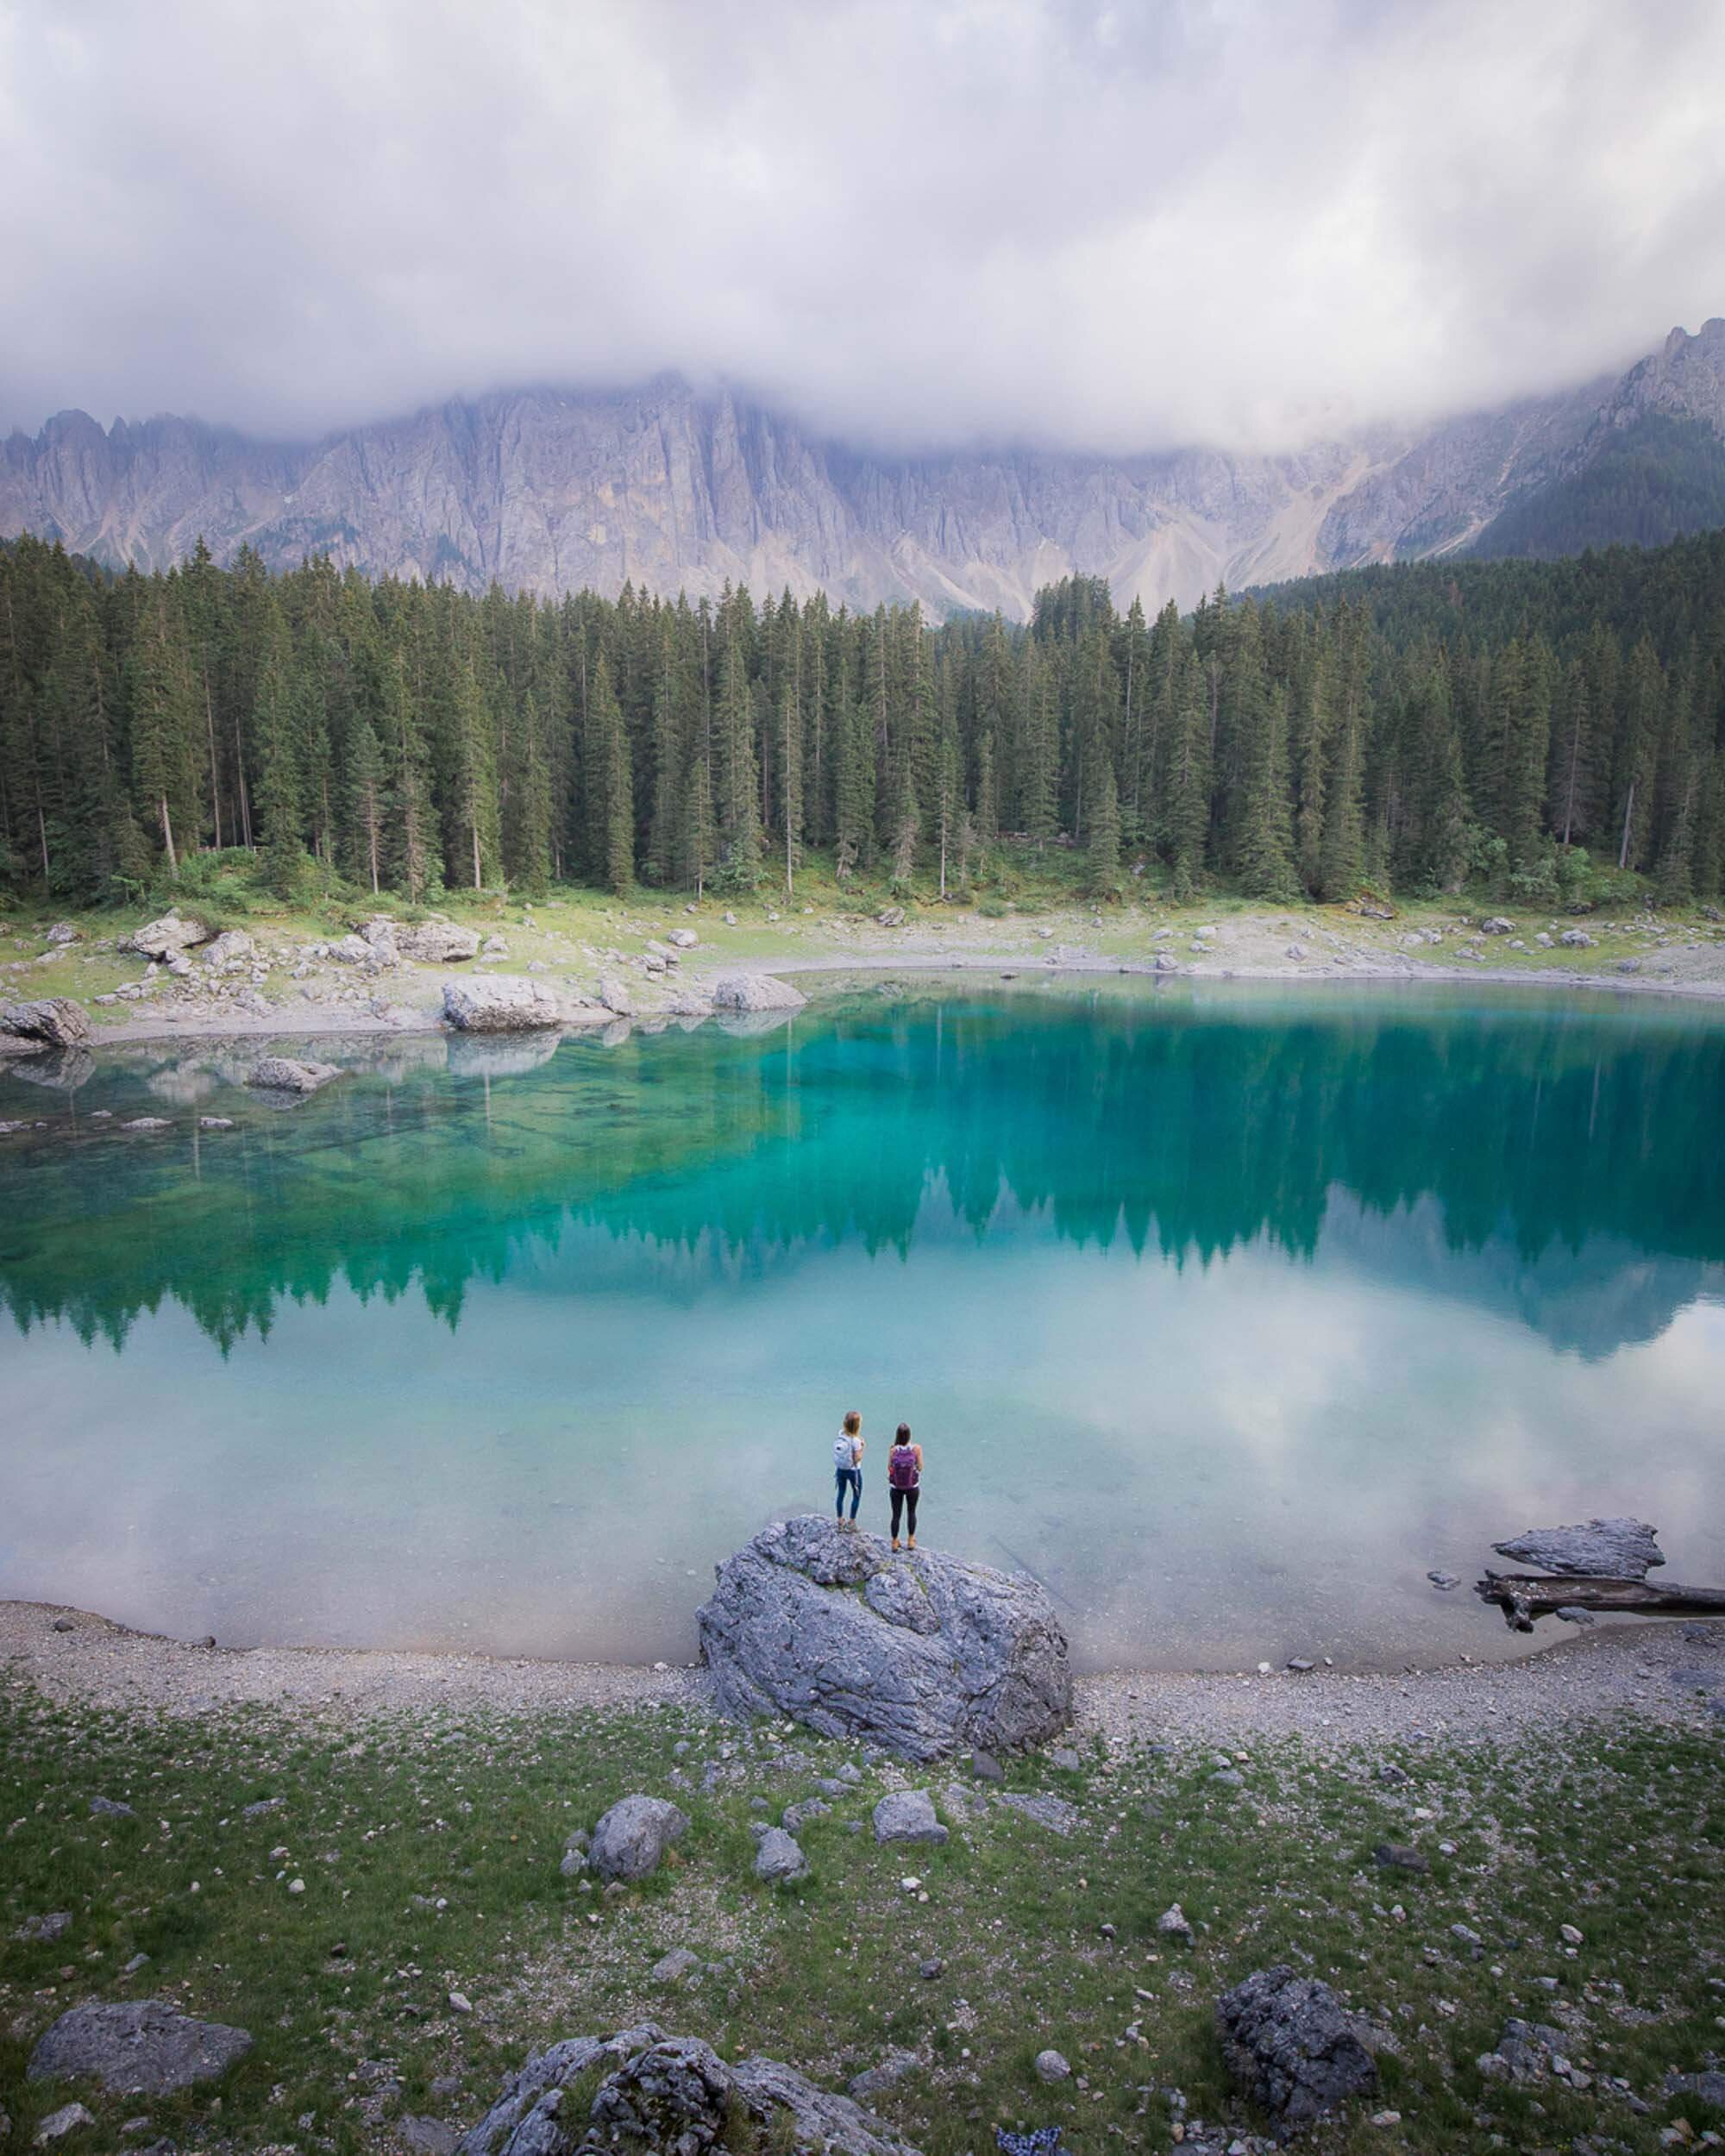 Lago di Carezza hike (also known as Karersee) in the Italian Dolomites. It is my understanding that you are no longer allowed to go down to the lake. There is now a walkway with a railing to guide.